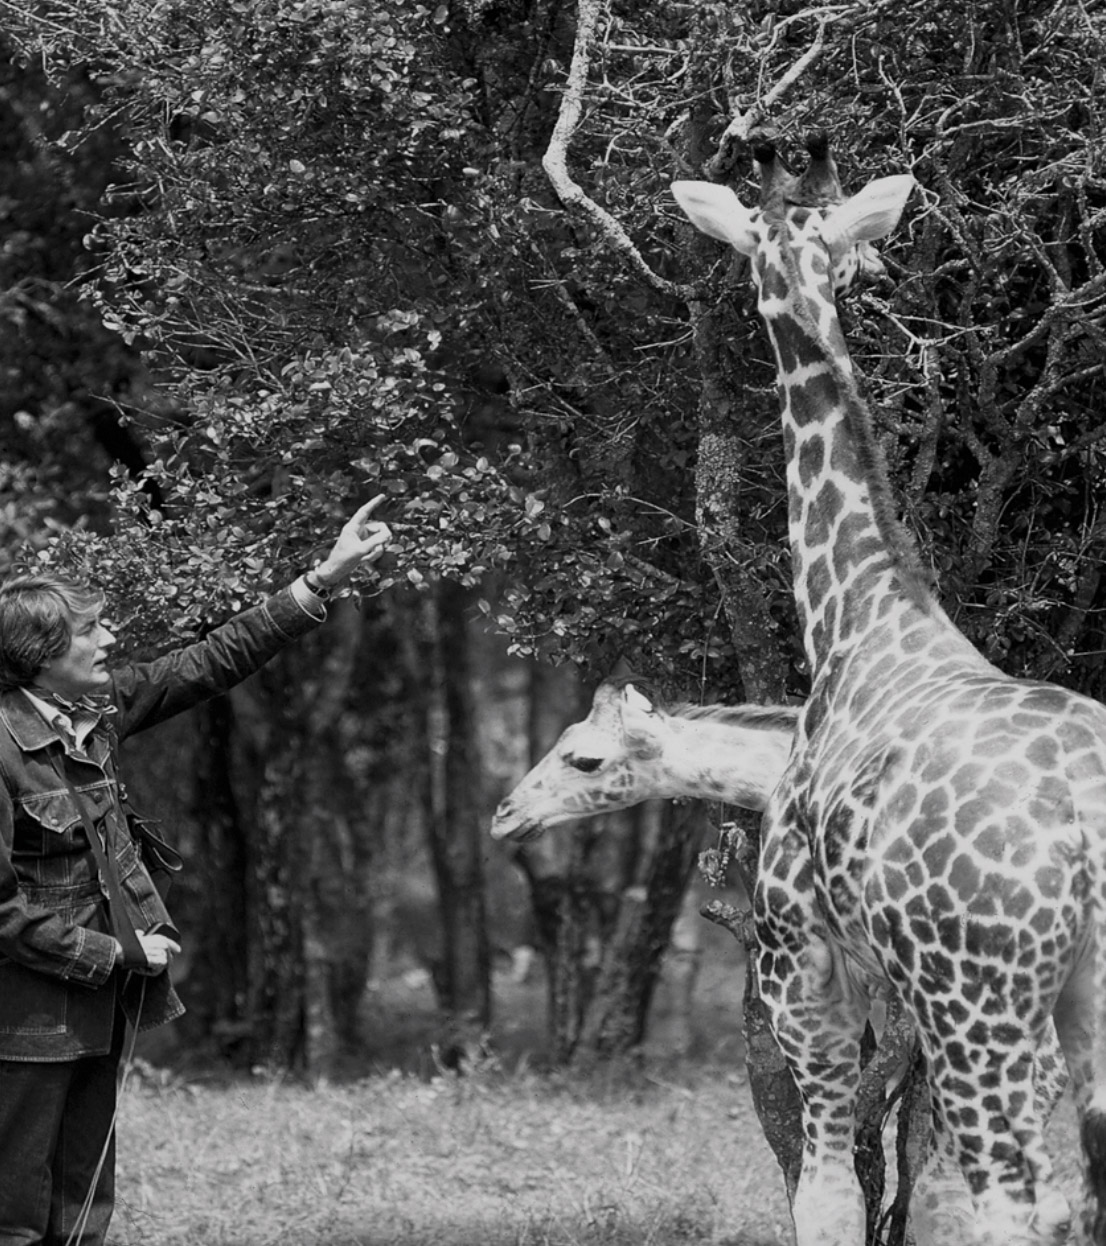 Jock points out which trees his new giraffes can eat 